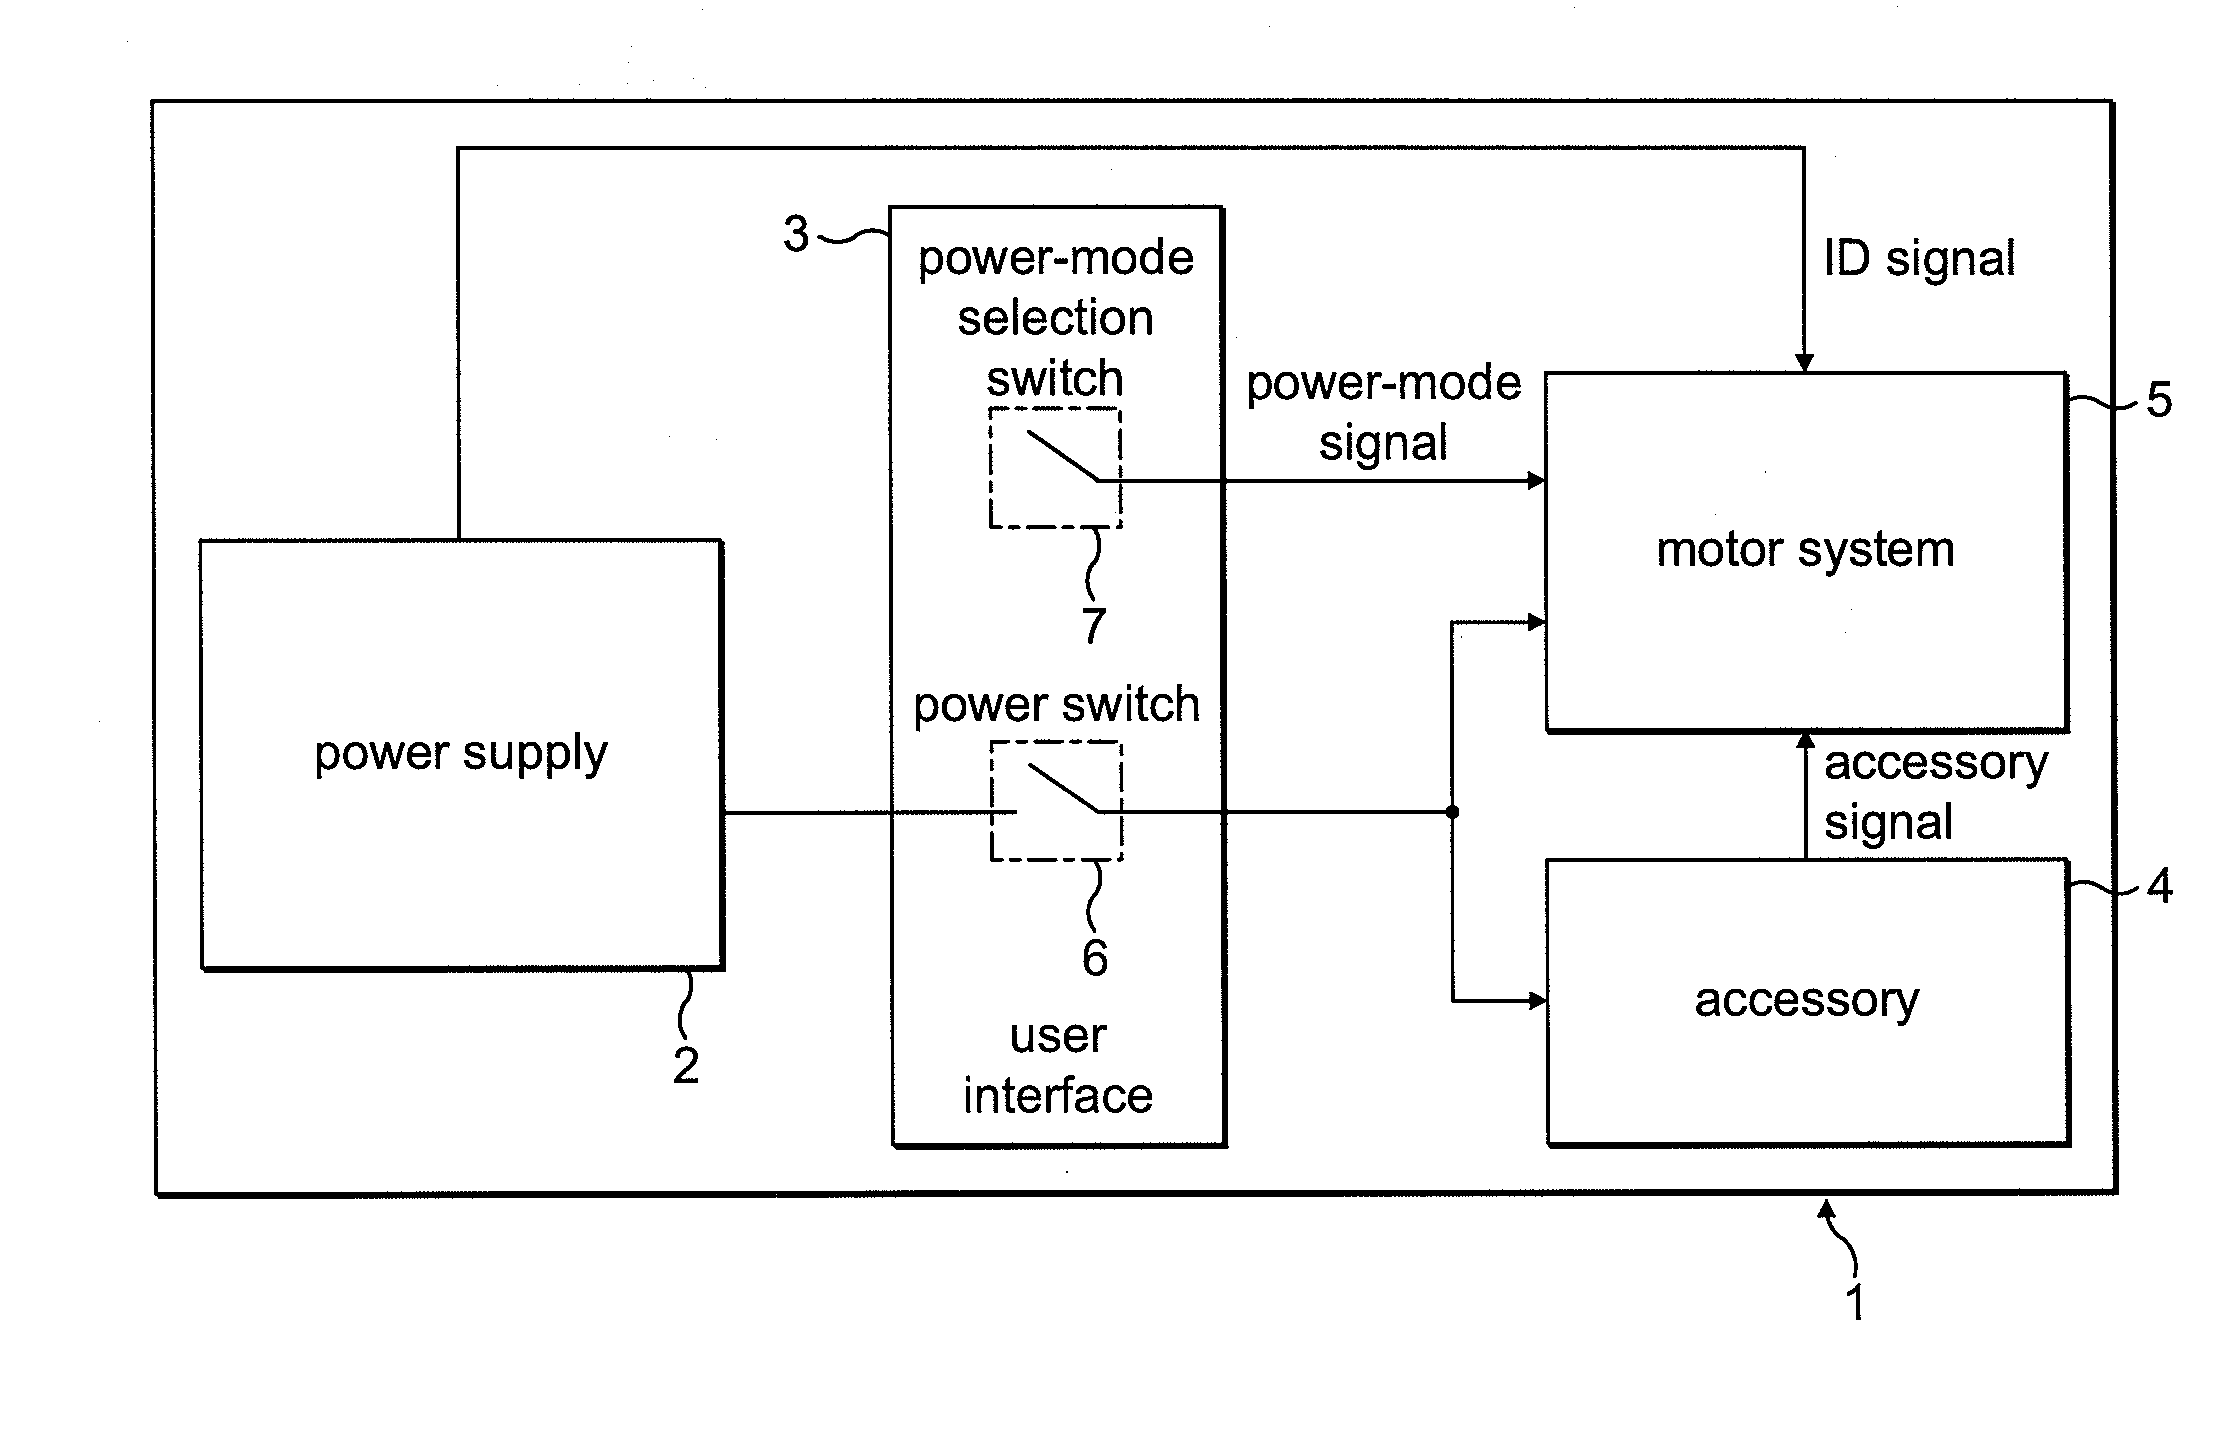 Constant-power electric system